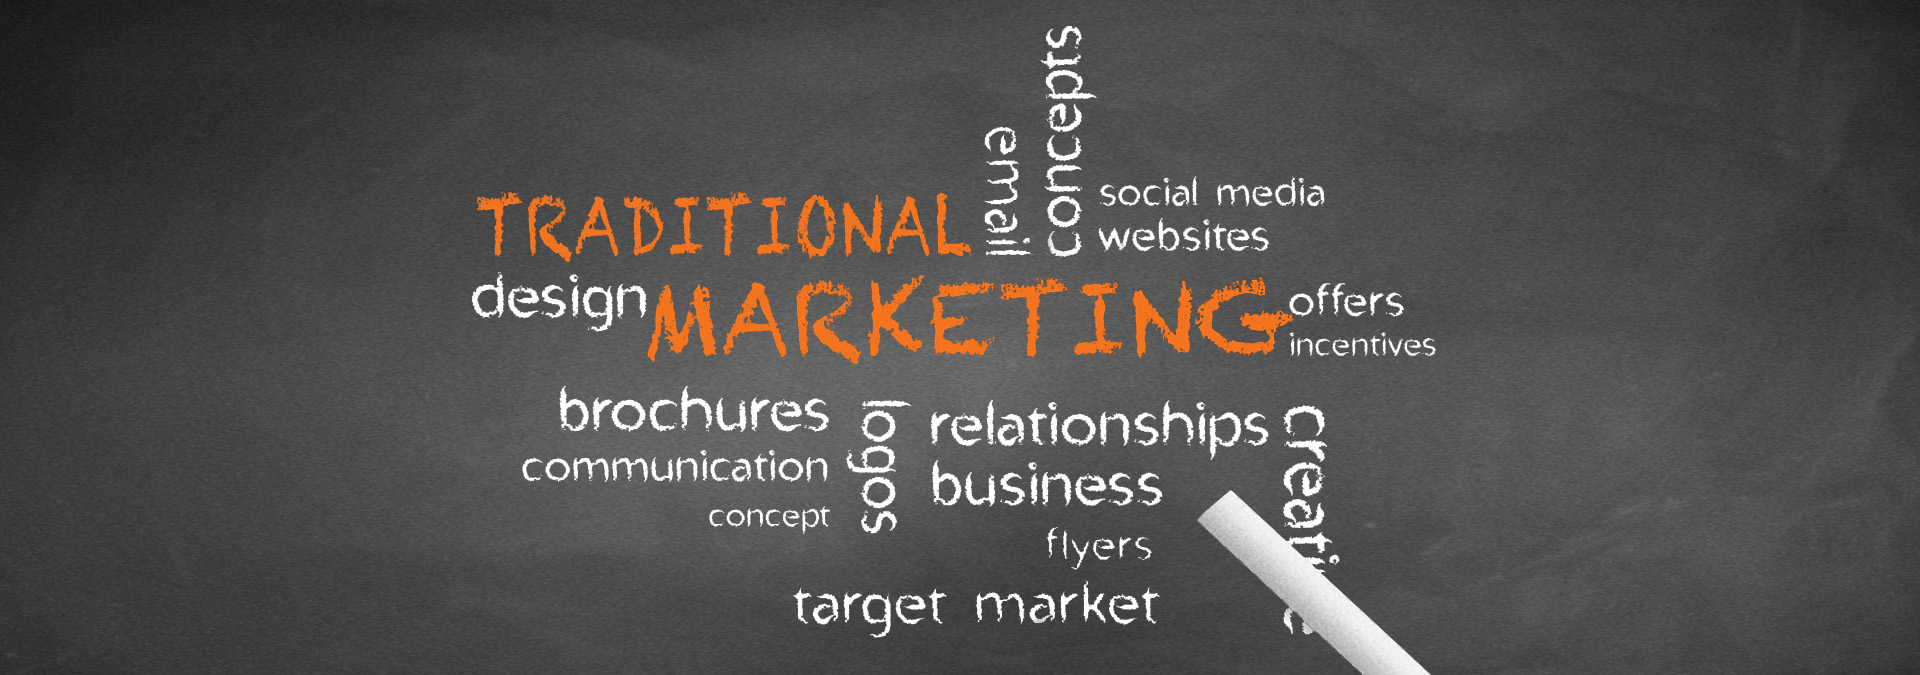 Why Traditional Marketing is Still Effective ...